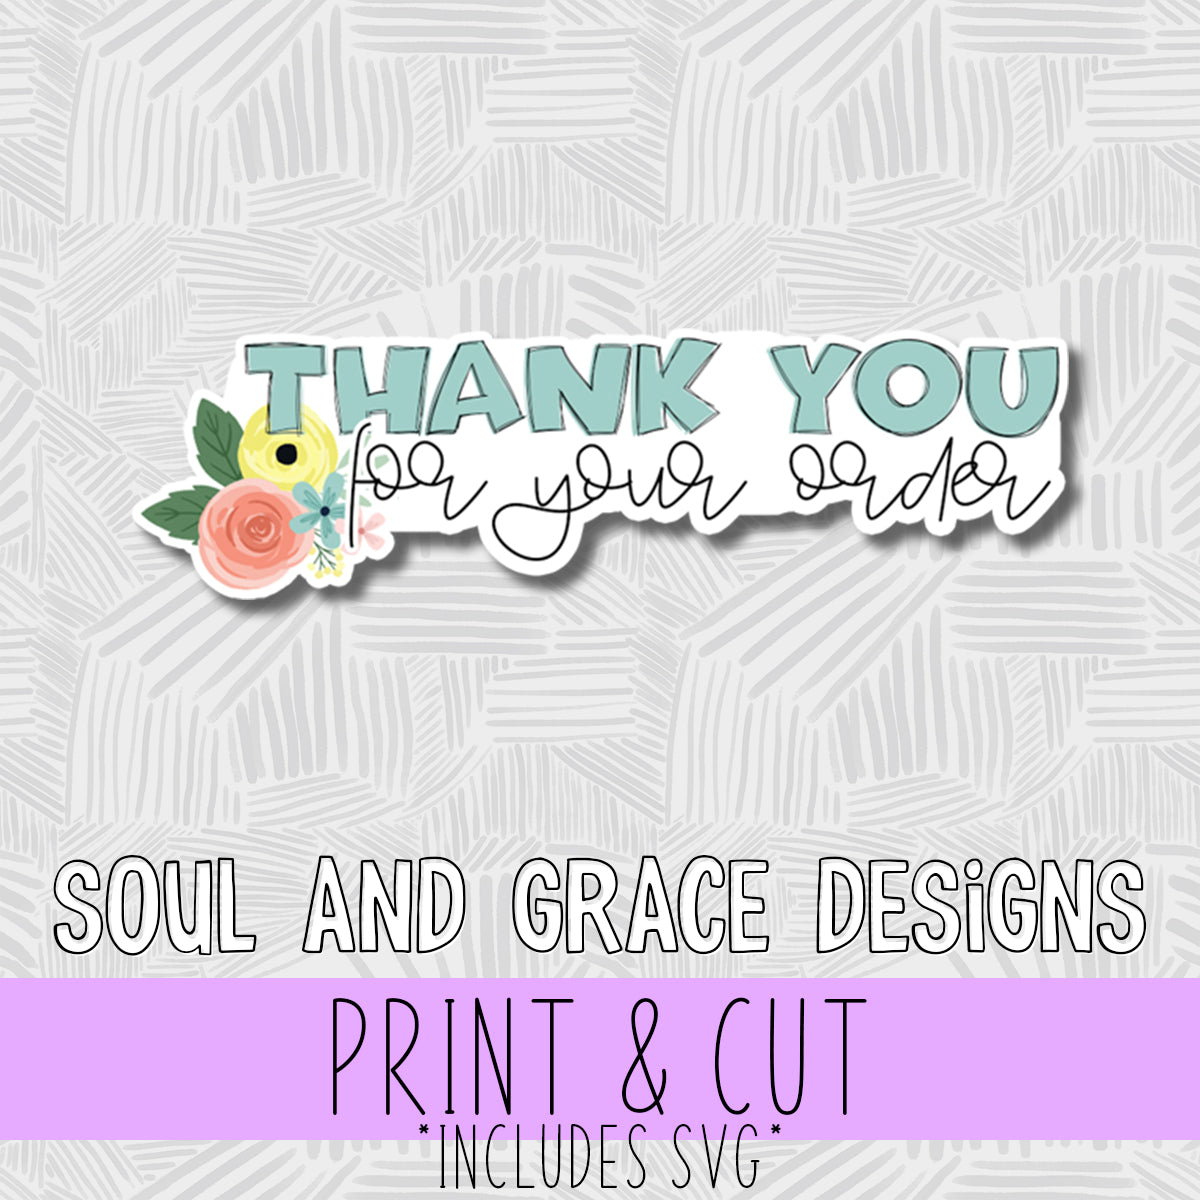 Thank You for Your Order Flowers [Digital Sticker]